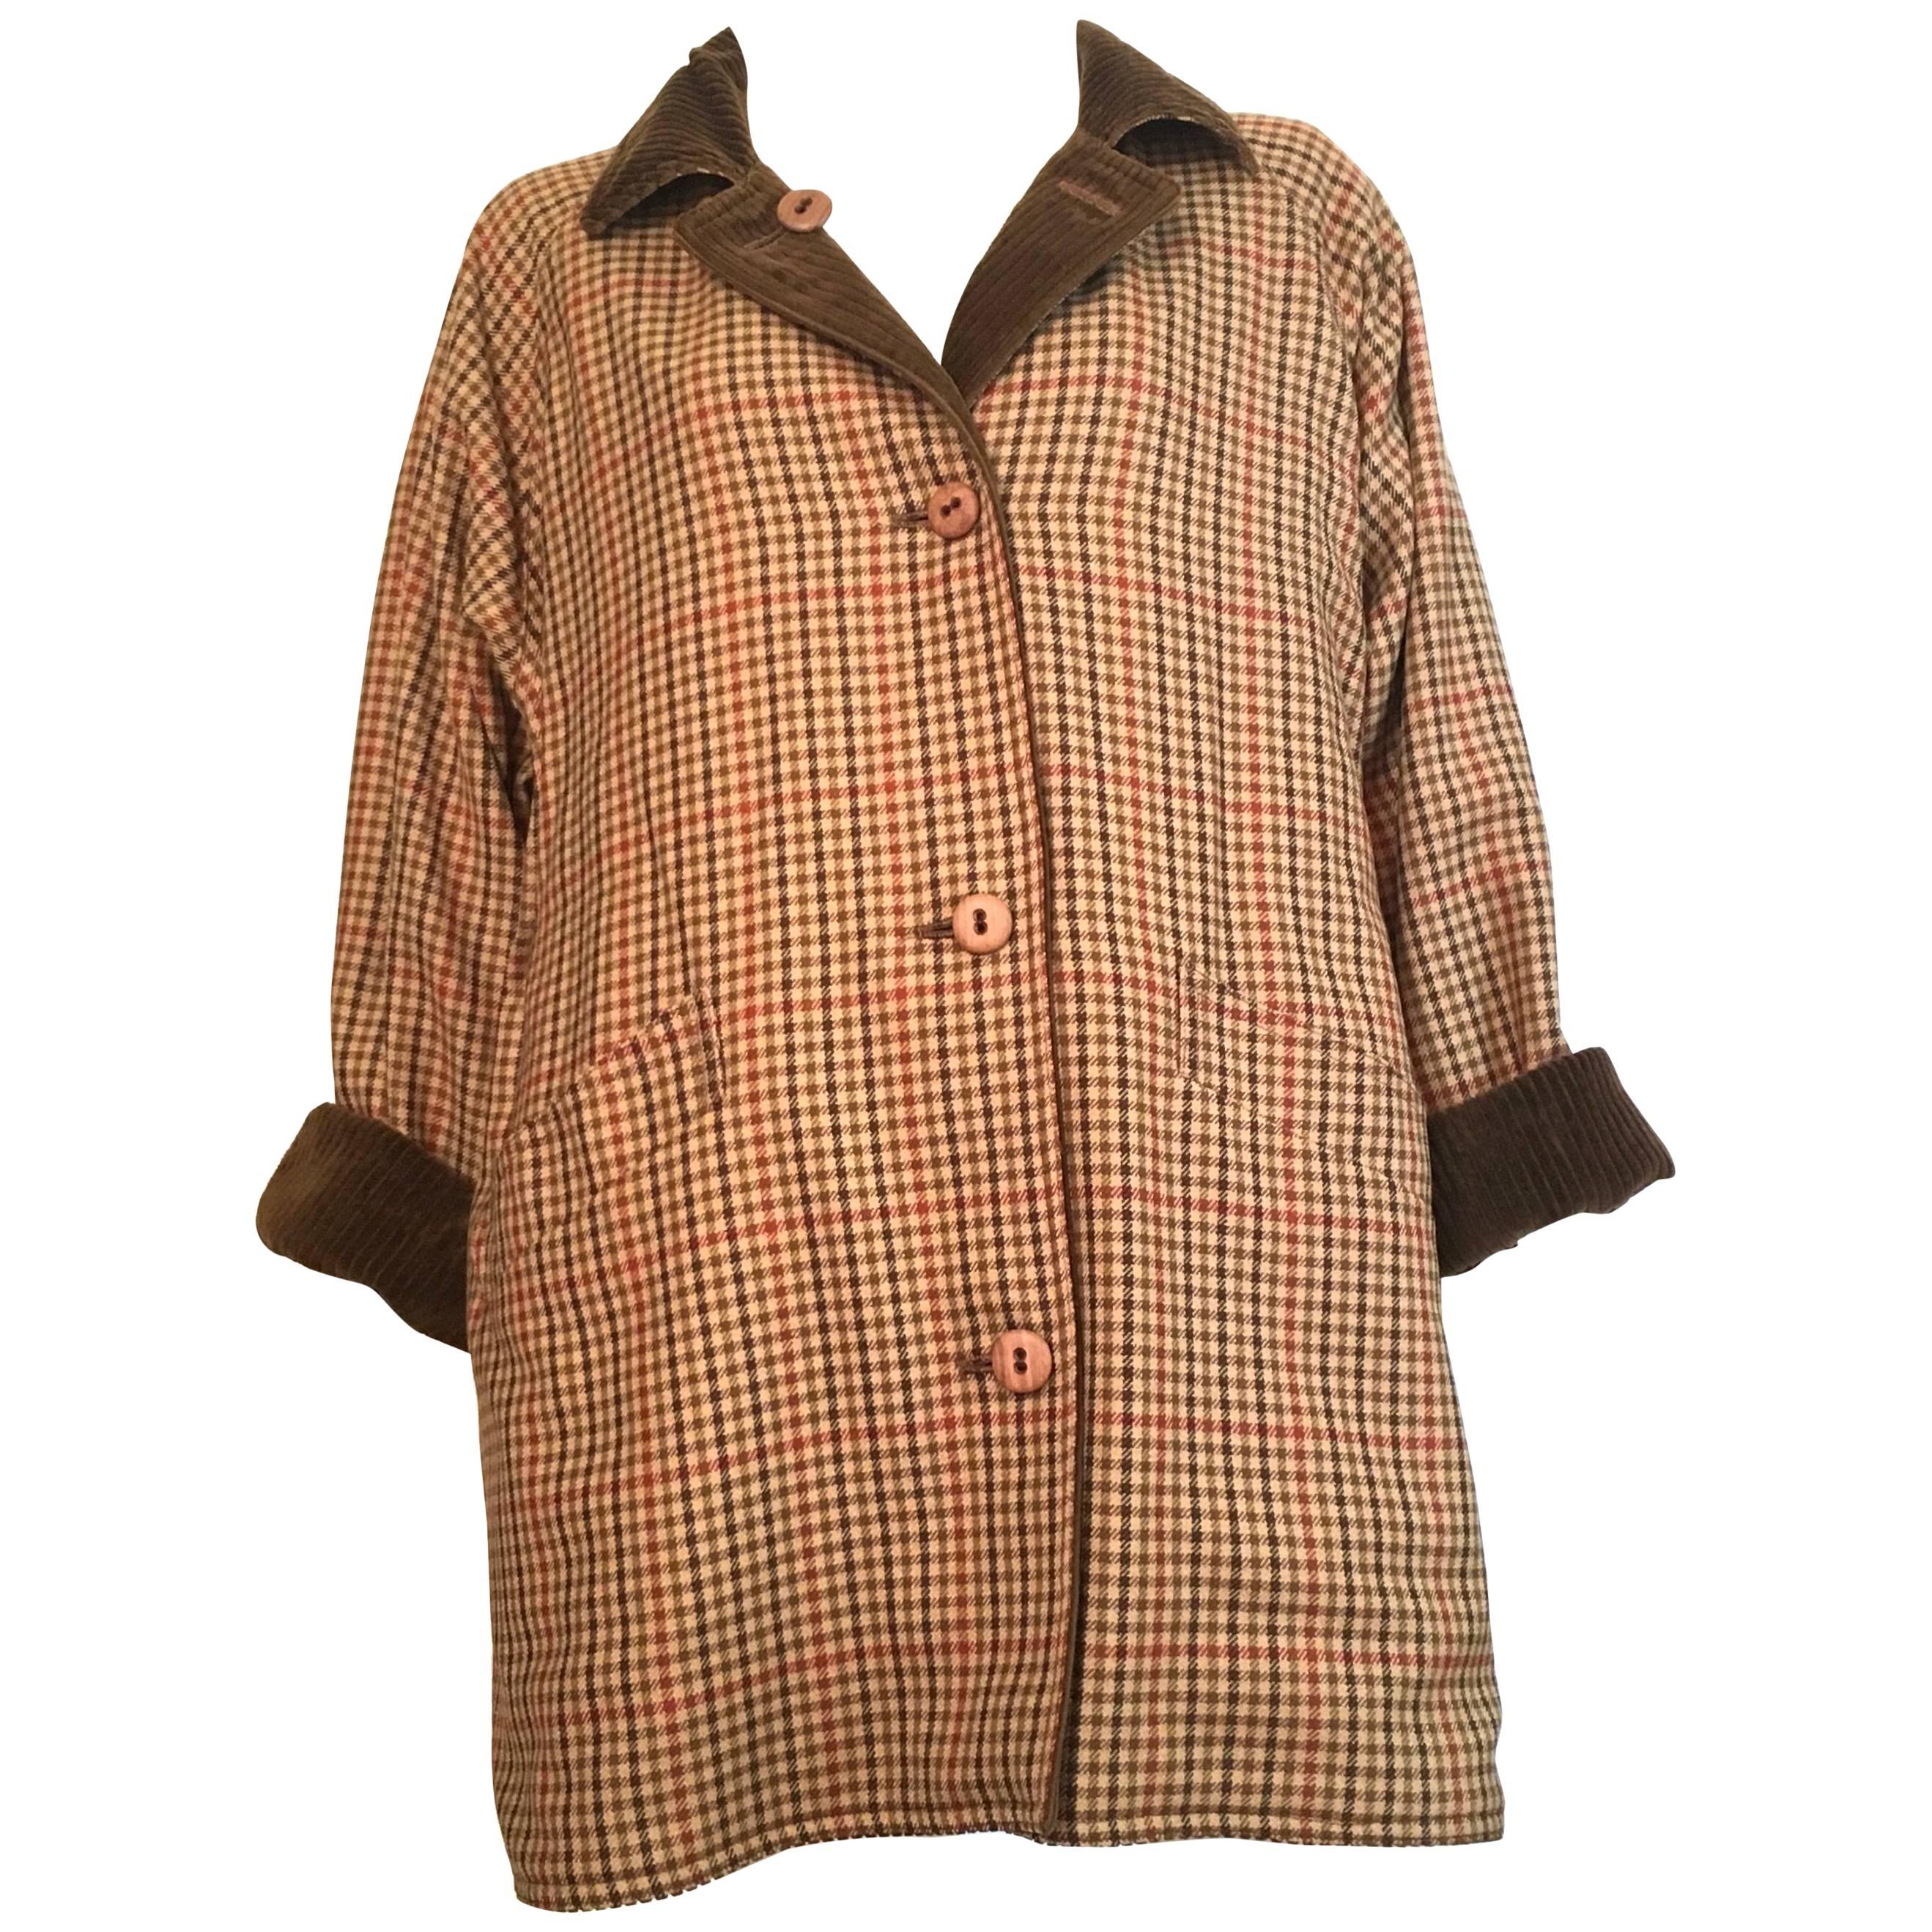 Bill Blass 1970s Reversible Plaid & Corduroy Coat / Dress with Pockets Size 12. For Sale